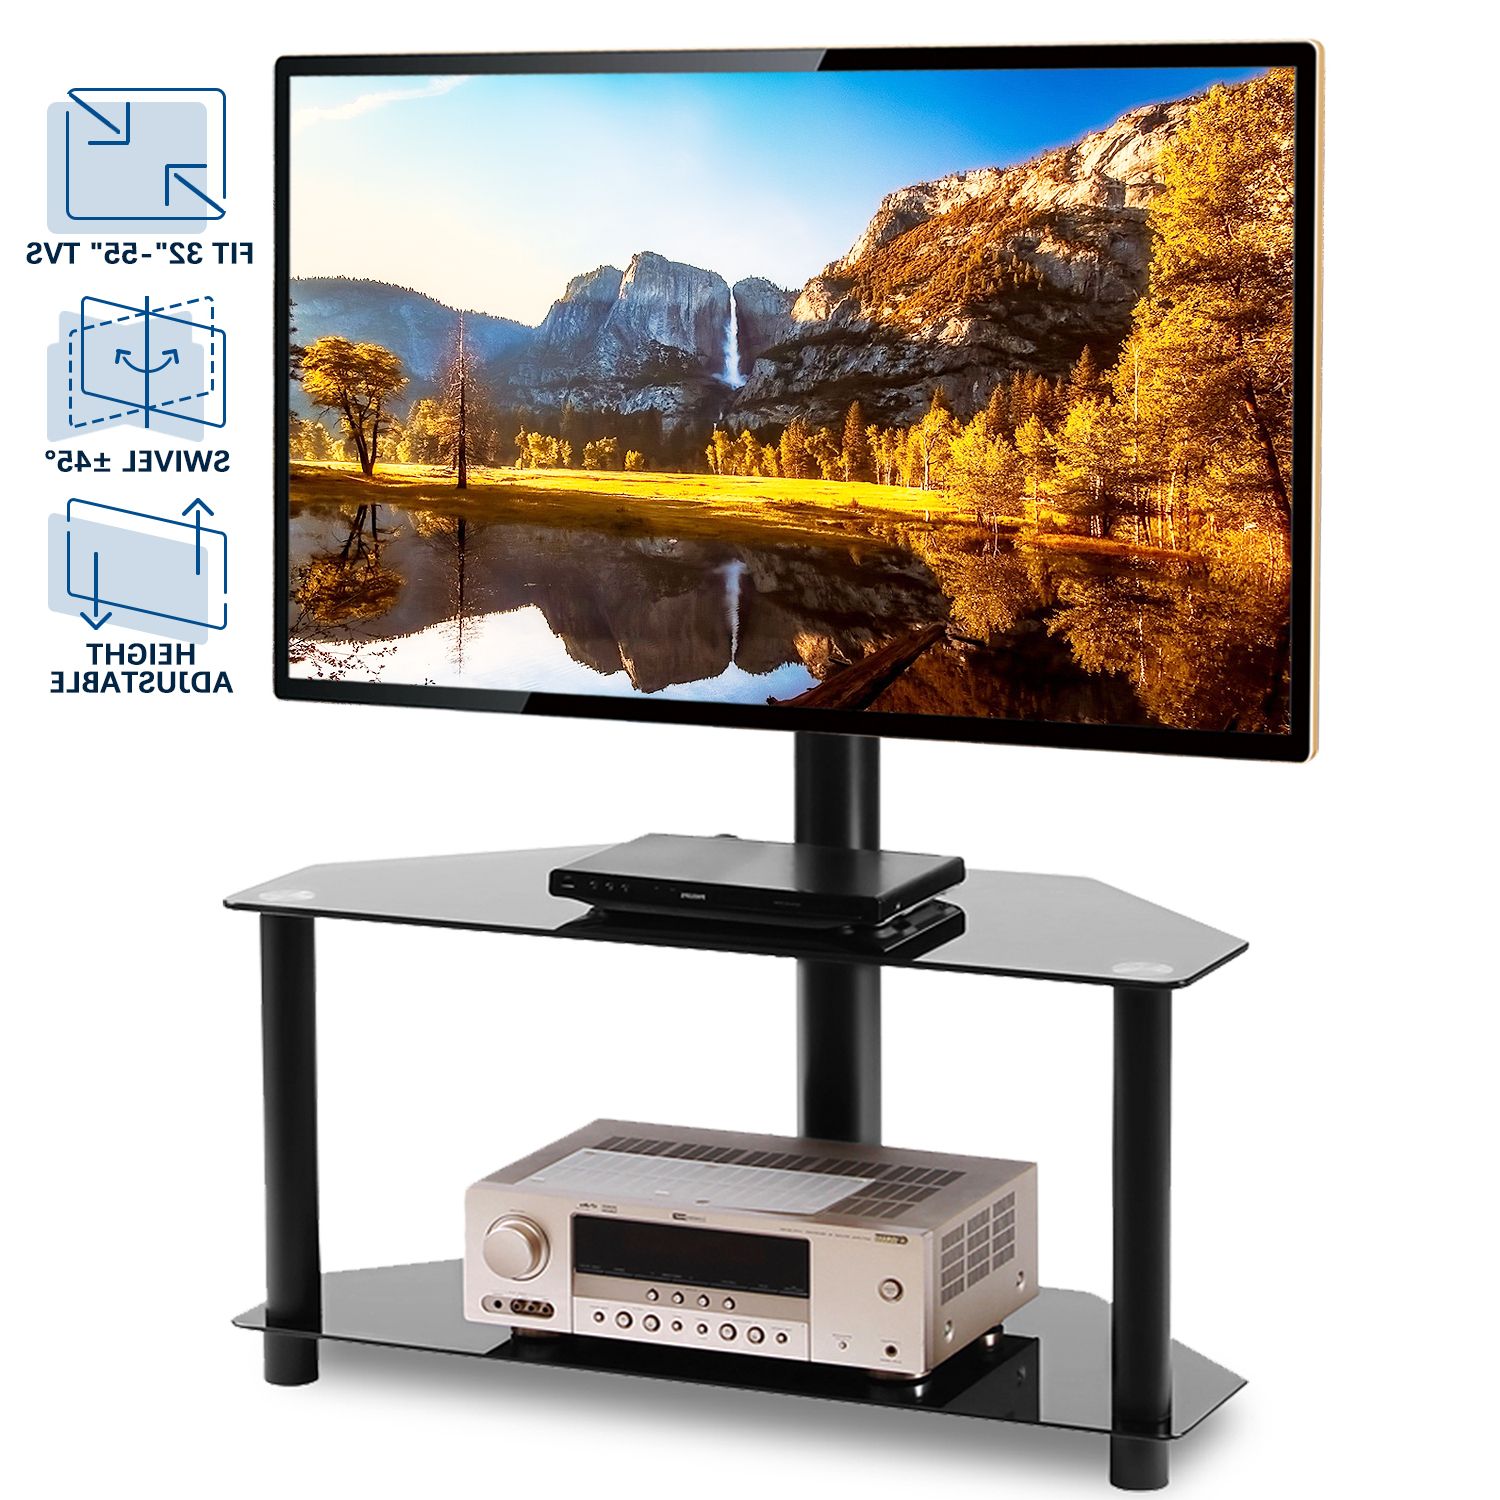 Rfiver Swivel Corner Floor Black Tv Stand For Tvs Up To 55 Throughout Corner Tv Stands For Tvs Up To 43" Black (Gallery 20 of 20)